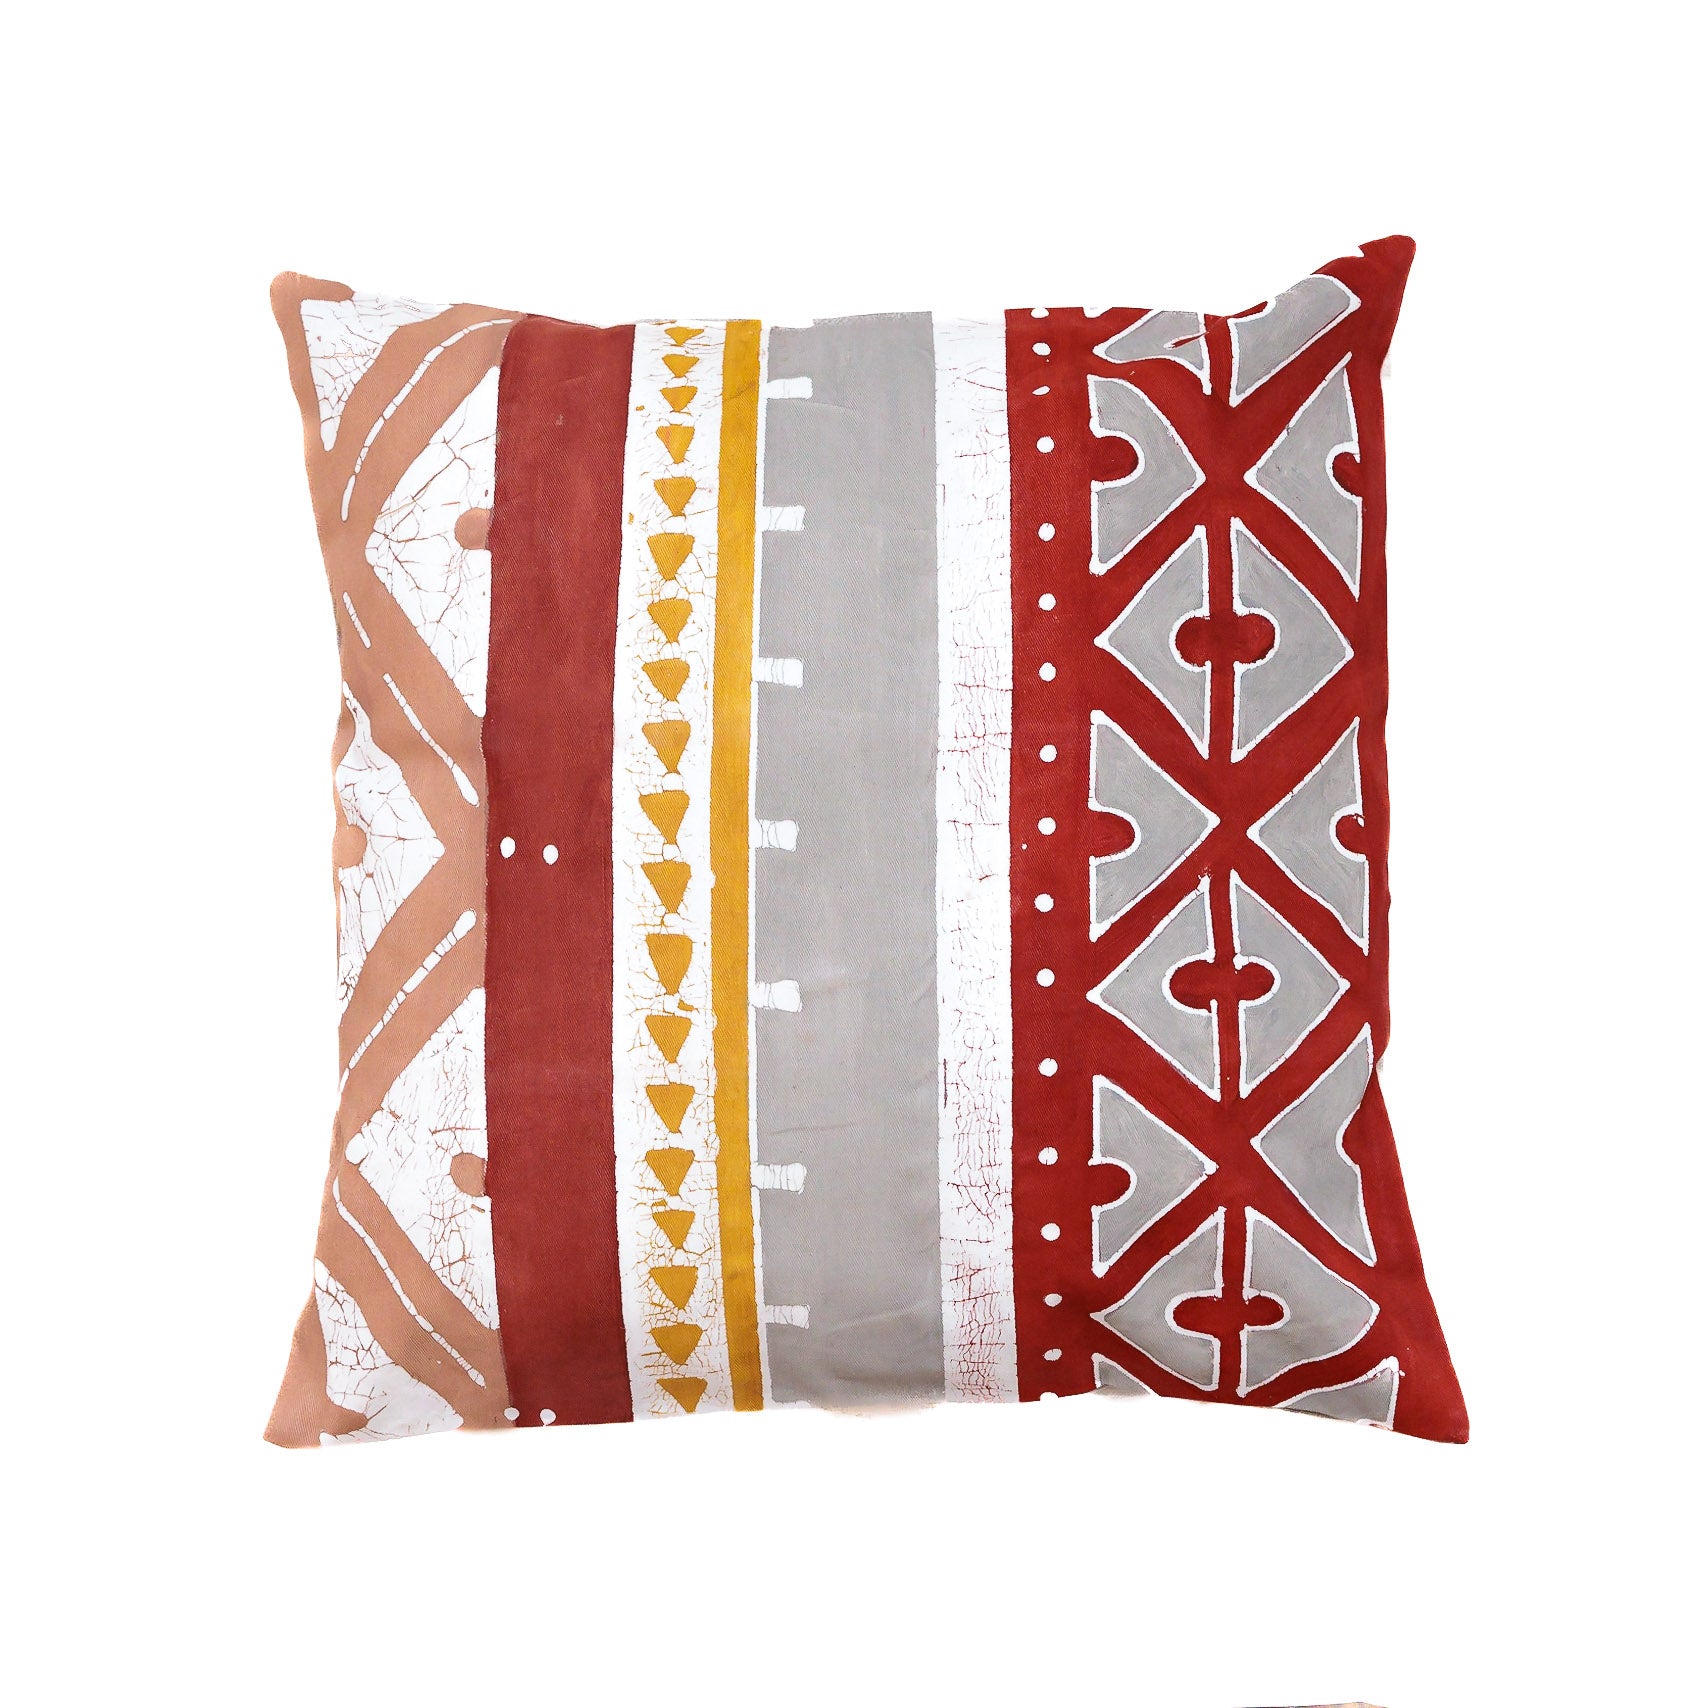 Atlas Multiprint Cushion Cover - Handmade by TRIBAL TEXTILES - Handcrafted Home Decor Interiors - African Made